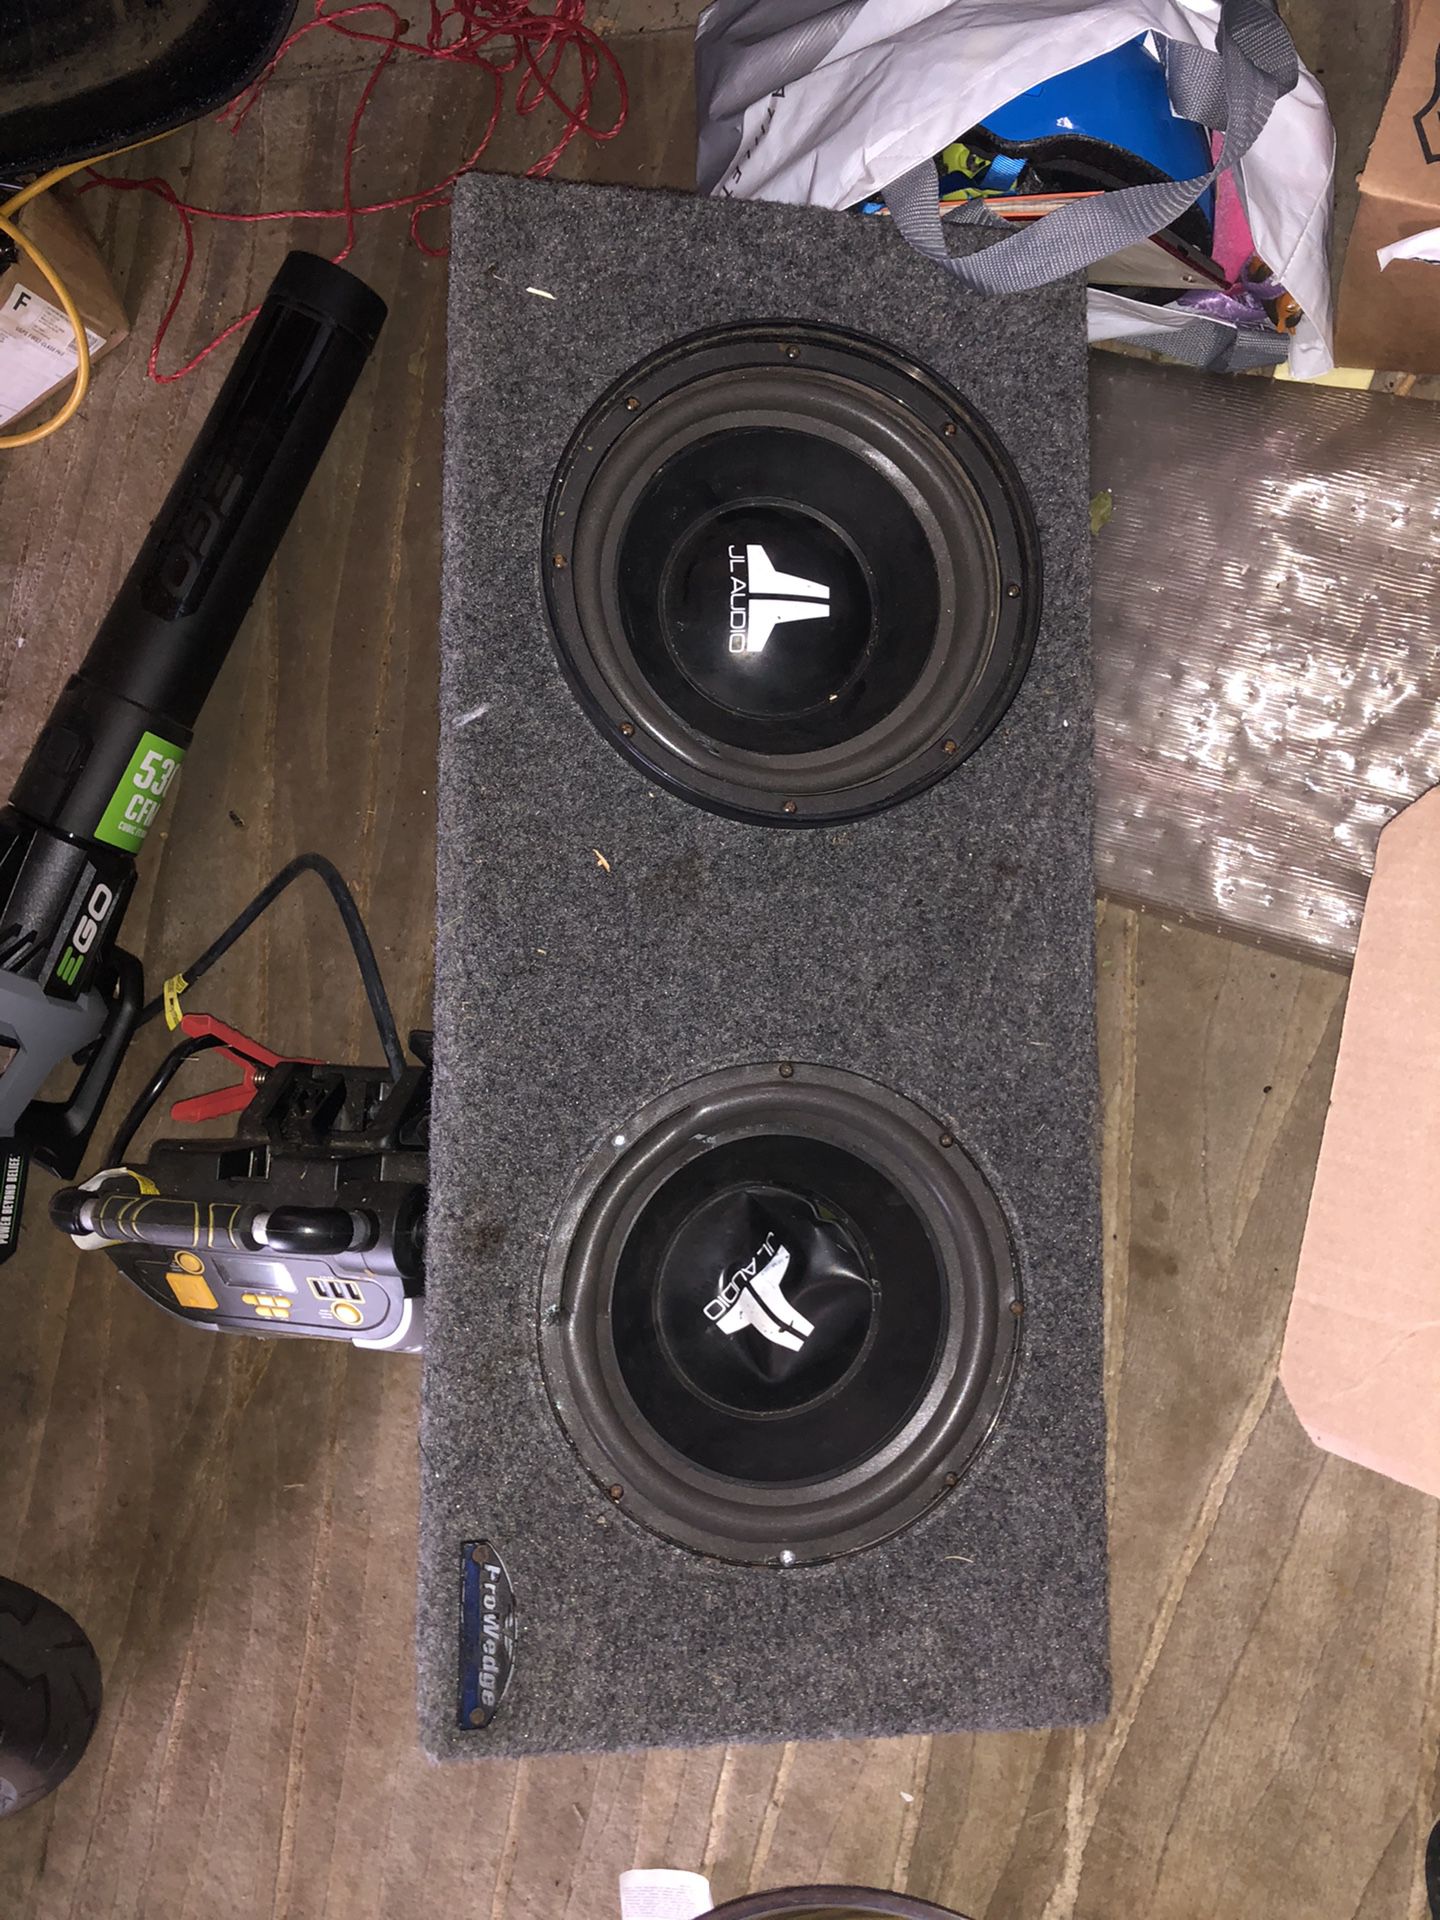 JL audio Subwoofer. Works but one speaker ripped.